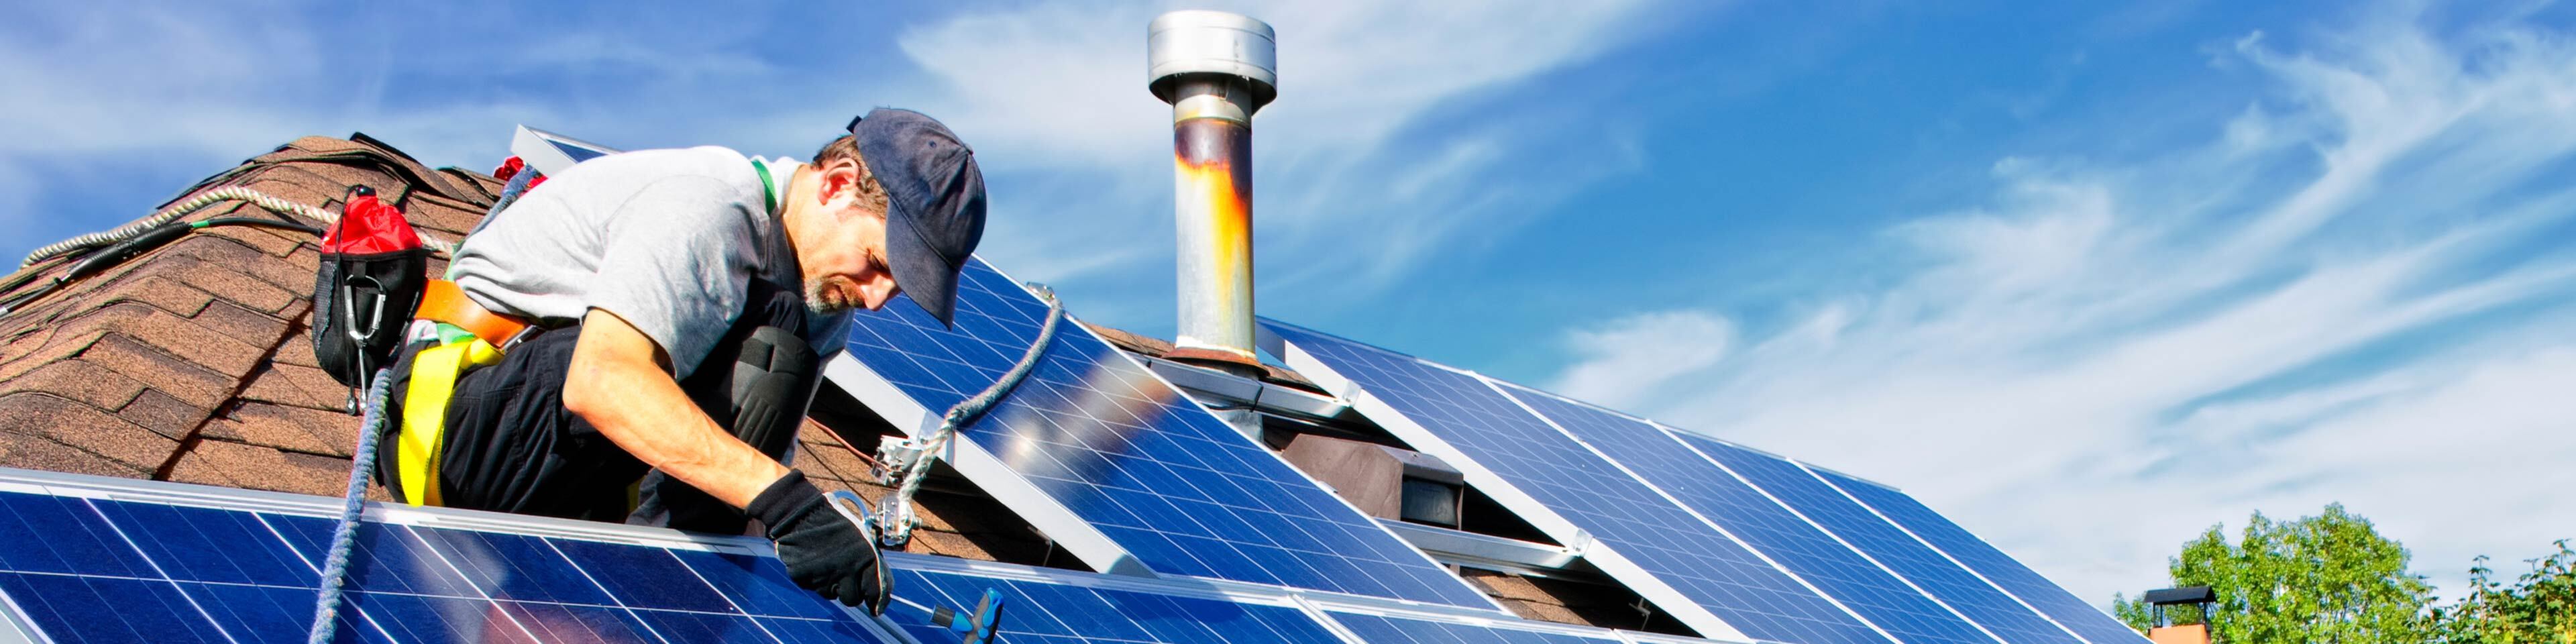 Solar Panel Business License Requirements